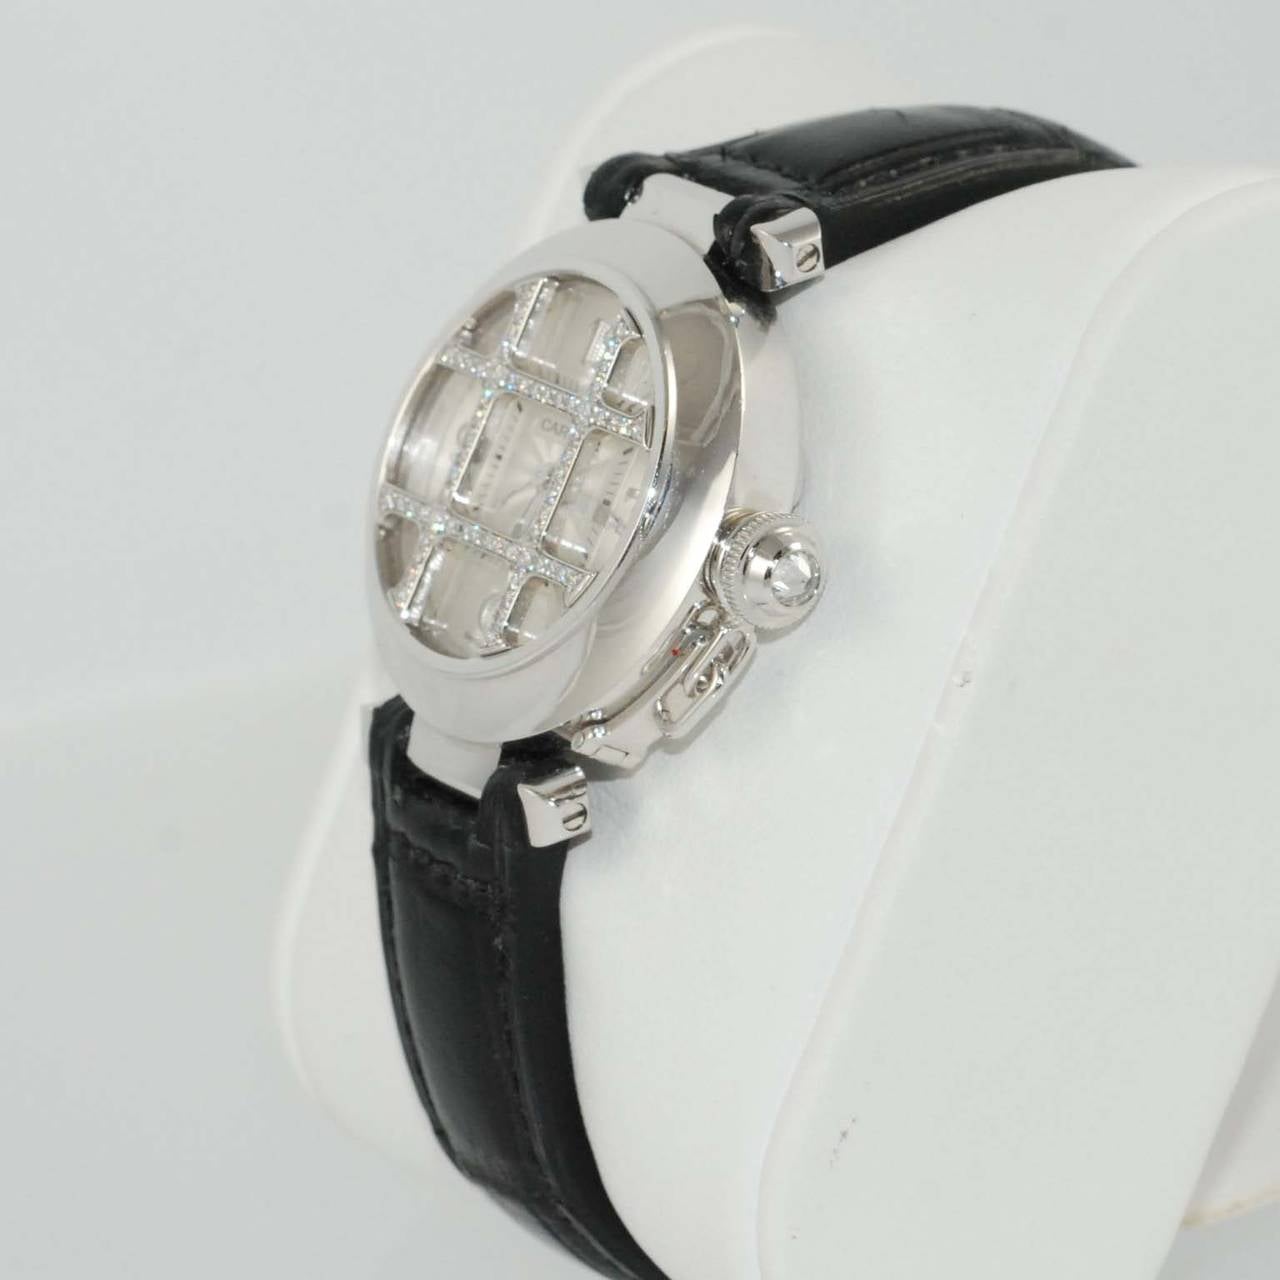 Cartier lady's 18k white gold Pasha wristwatch with removable diamond grid, 32mm, automatic movement, white dial, white gold numerals at 12, 3, 6 and 9 on black alligator strap with 18k white gold ardillon buckle.

Brand new in box
Original retail